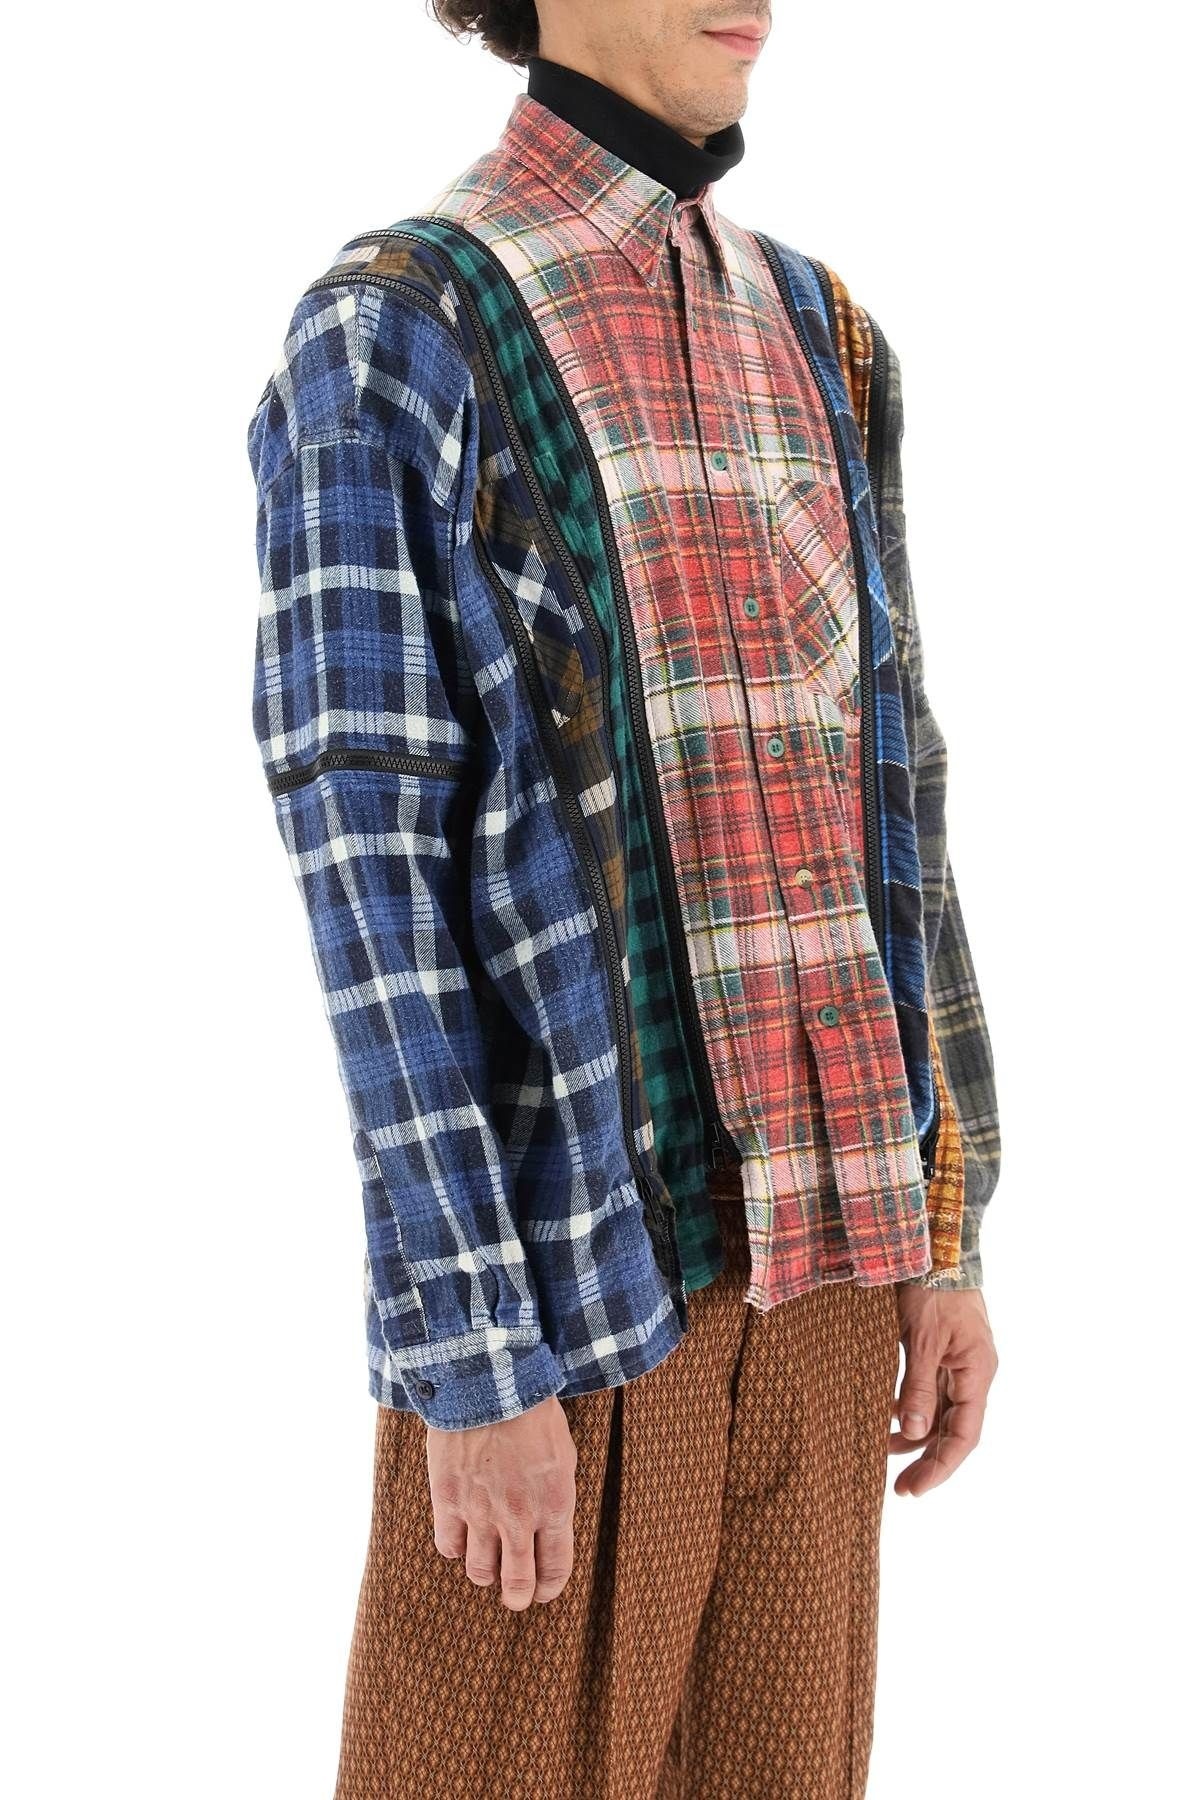 NEEDLES 'REBUILD' PATCHWORK FLANNEL SHIRT WITH ZIPPERS NEEDLES 